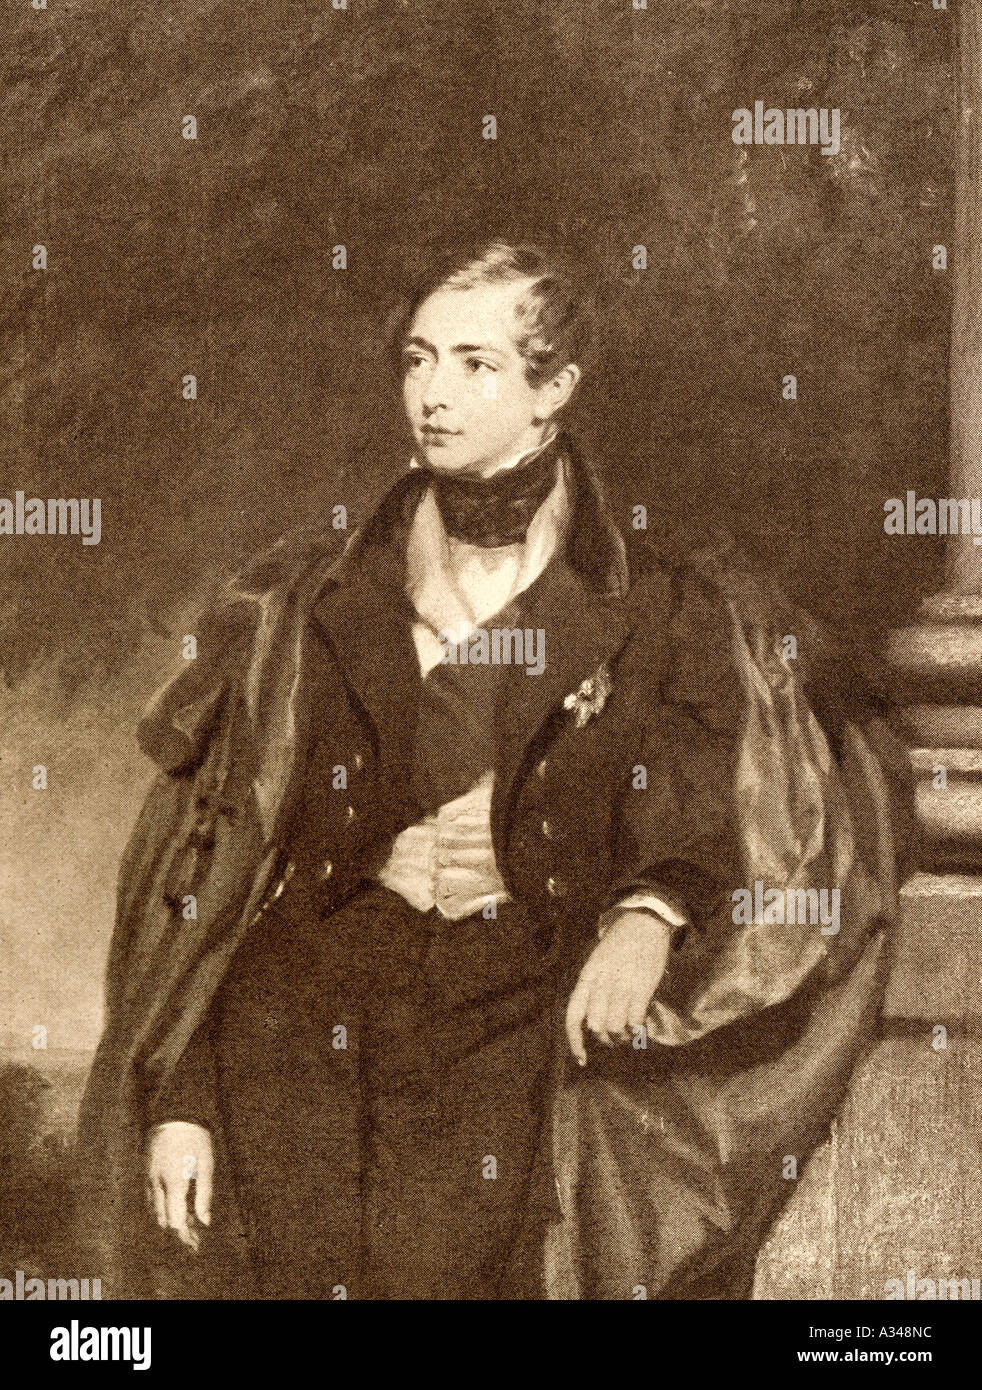 Prince George, Duke of Cambridge, 1819 - 1904. British army officer and commander in chief of the British army, 1856 to 1895. Stock Photo